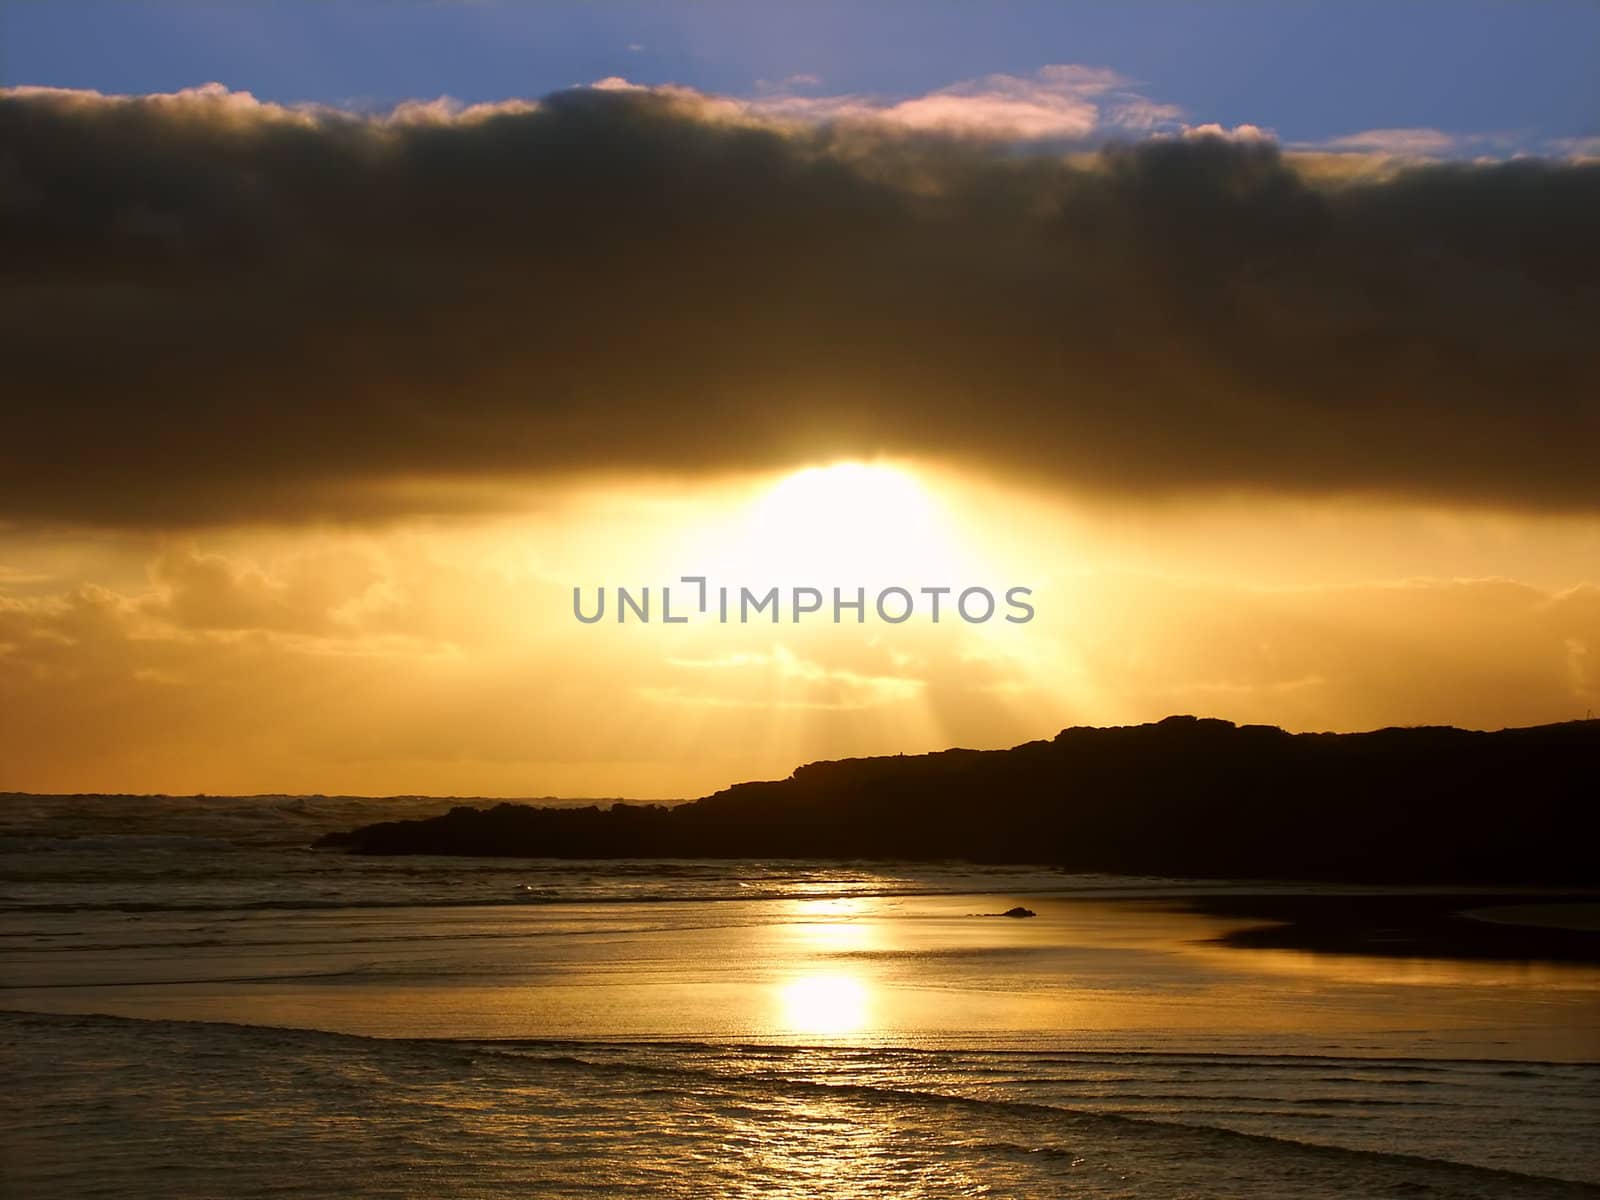 Sunset over the beautiful ocean coast at the city of Warrnambool in Victoria, Australia.